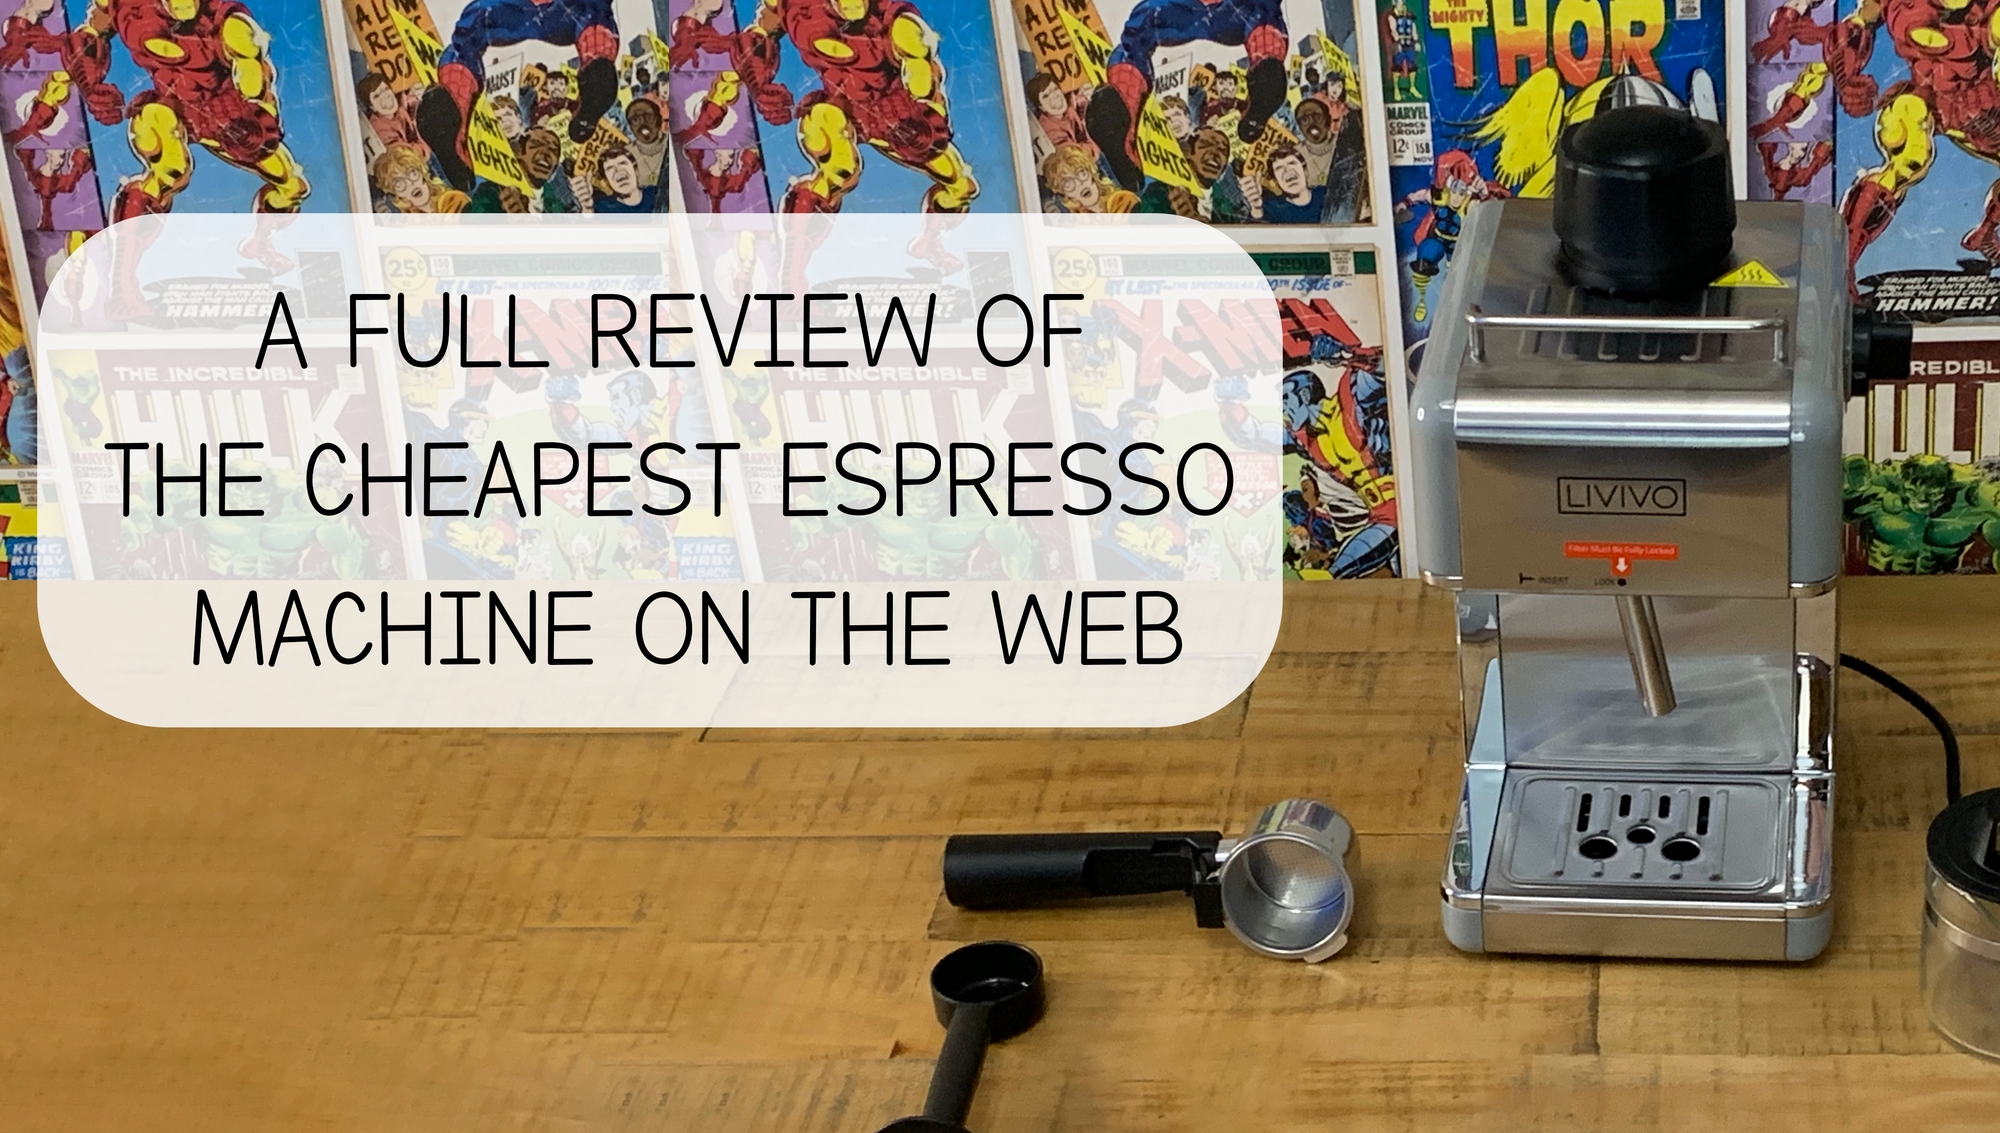 The cheapest coffee machine on the web